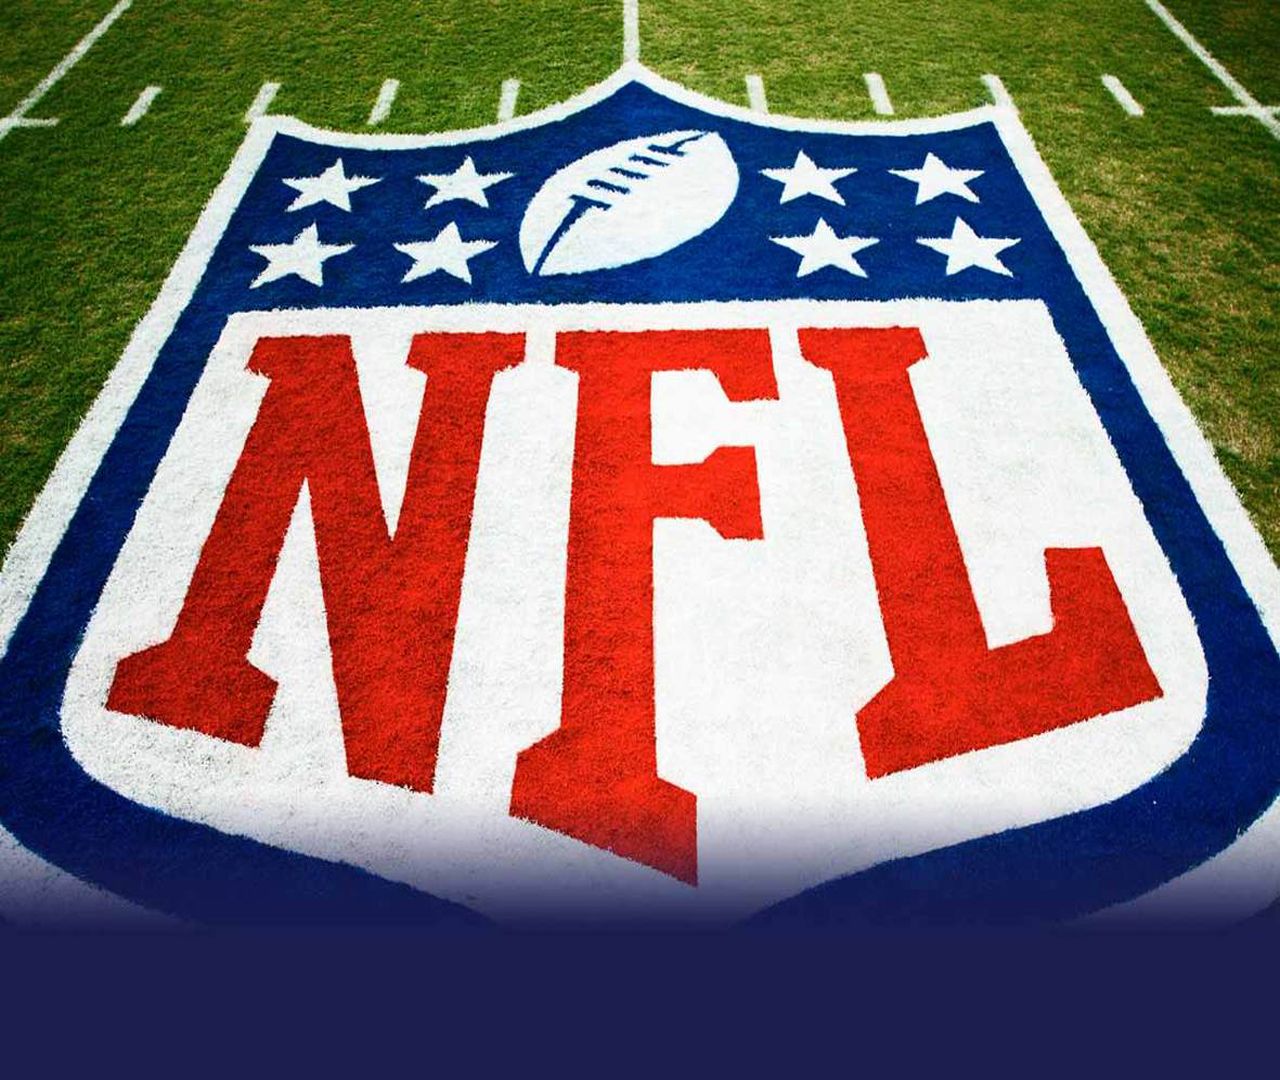 NFL 2012 - Free Download NFL Football HD Wallpapers for iPad and ...